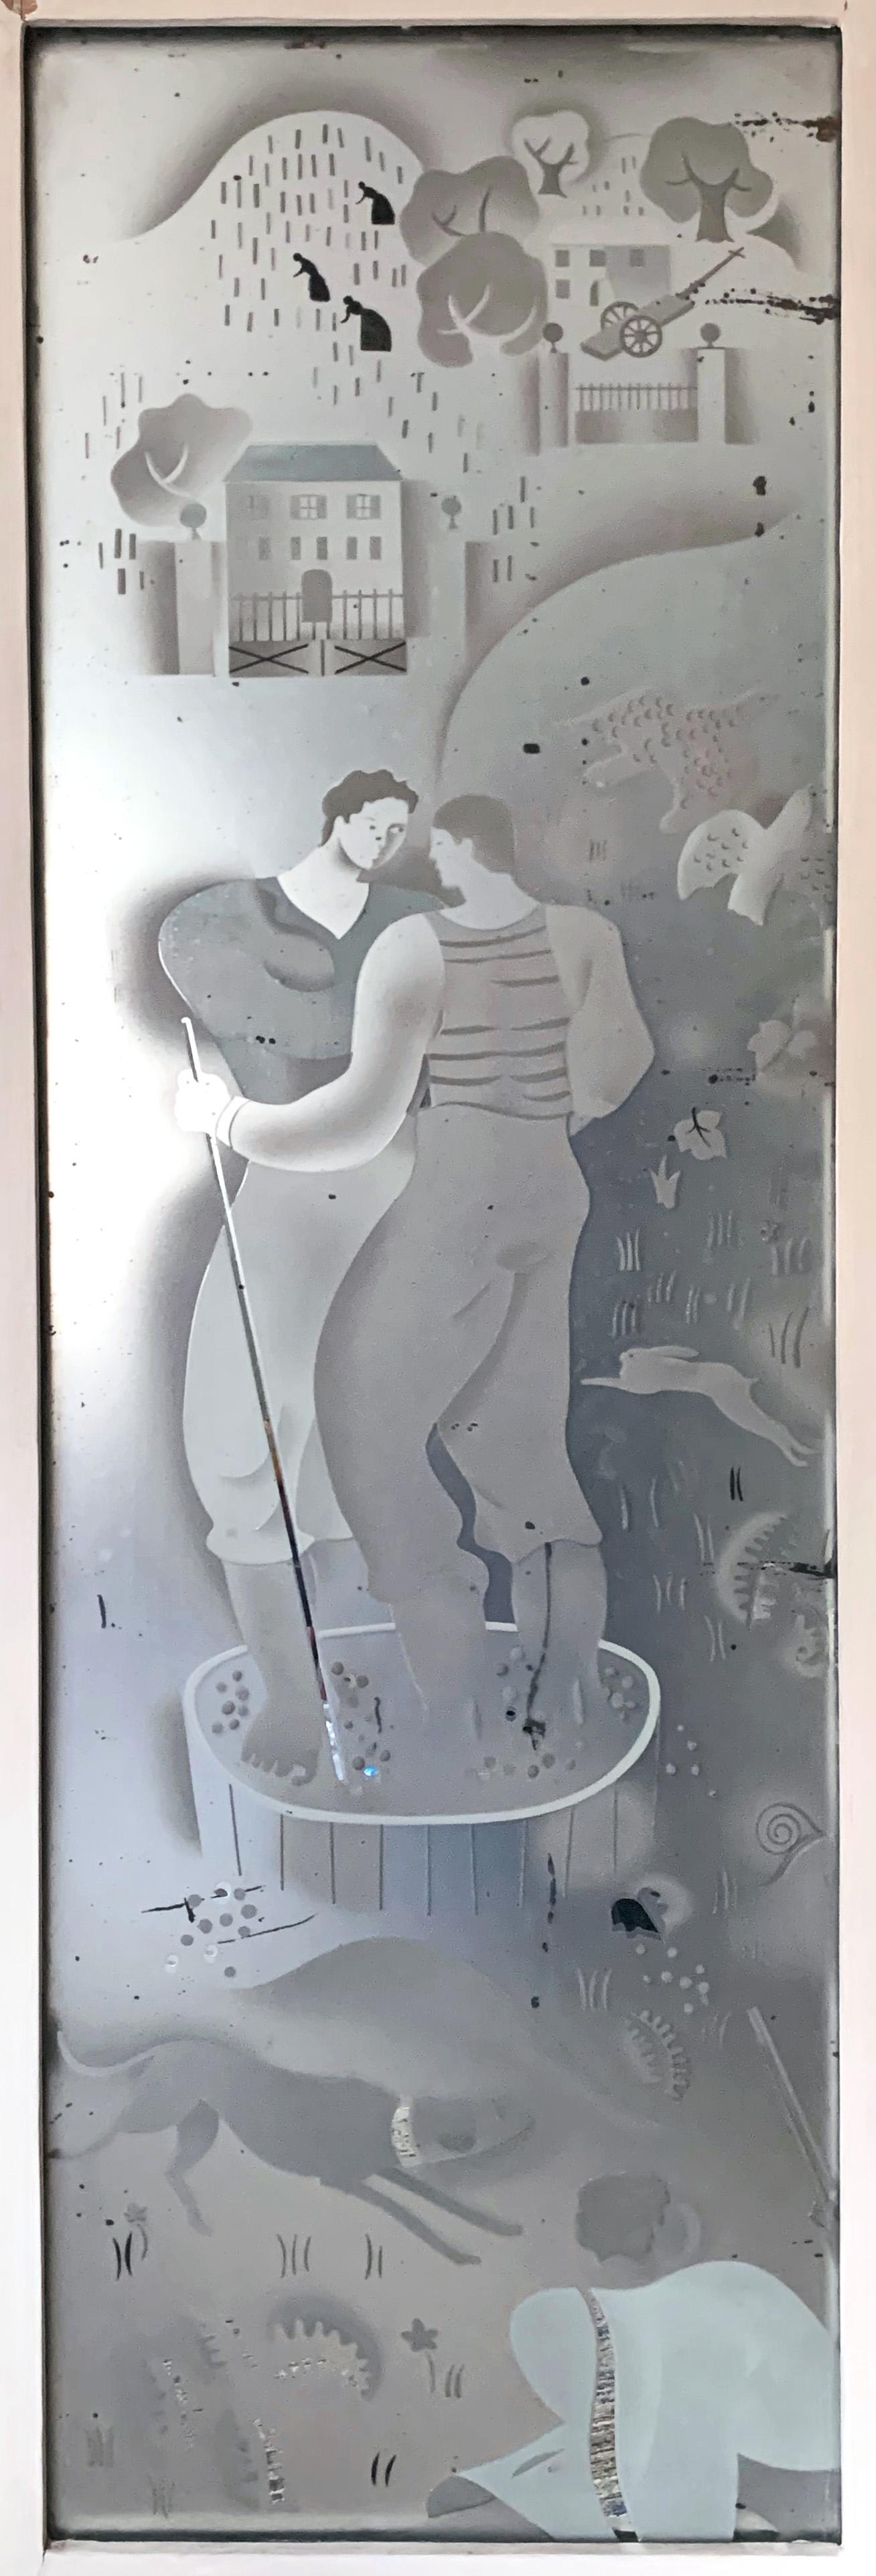 Remarkable in its size, ambition and complexity, this large Art Deco mirrored panel depicts a grape stomping scene at its center, surrounded by a farm scene full of life, executed in etched and enameled glass. In addition to the couple at its